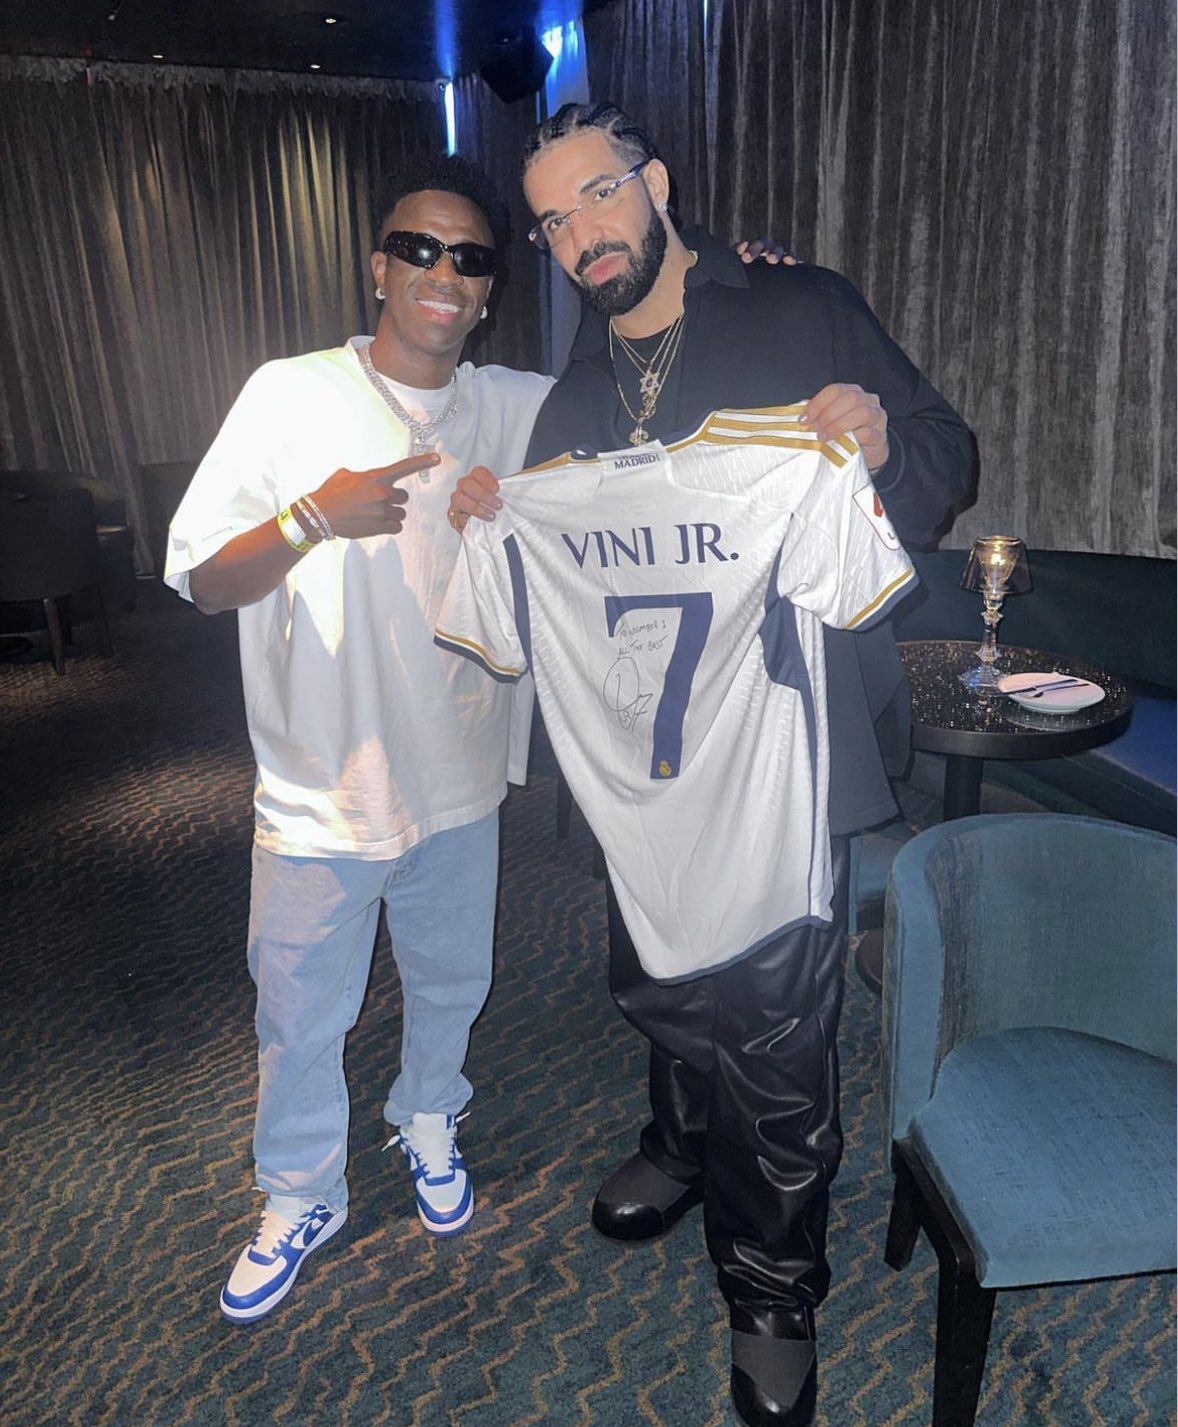 Following Drake's display of Vinicius' shirt, Real Madrid Twitter users are anticipating the worst.